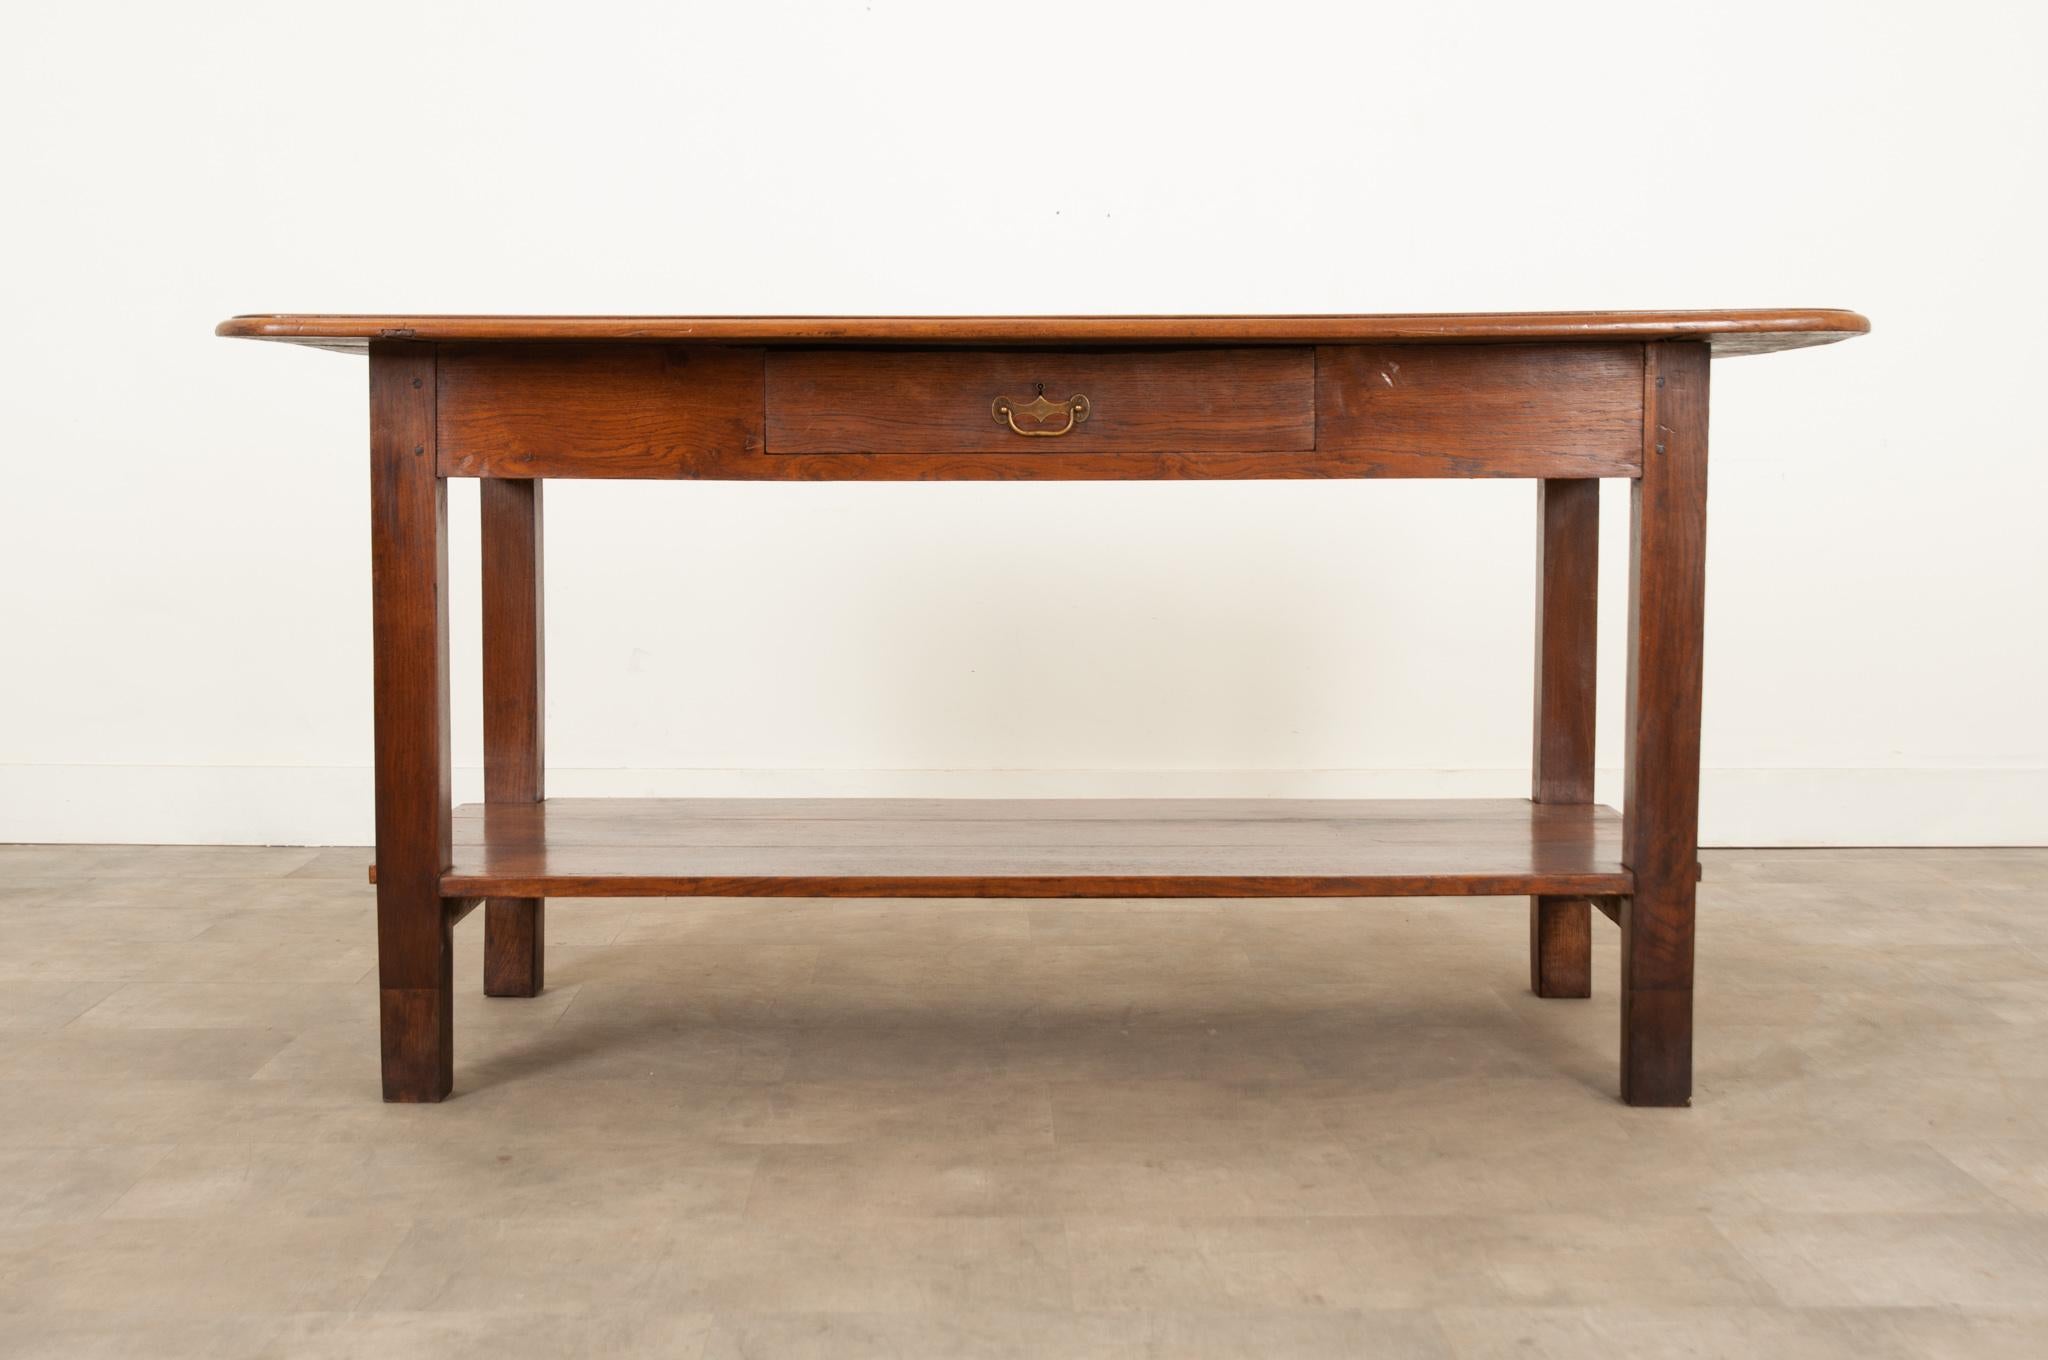 This stunning French 19th century work table from Burgundy with its thick oak top and legs that have been raised to standing height, would make a gorgeous kitchen island. Crafted from solid walnut and oak, it remains incredibly sturdy and level.